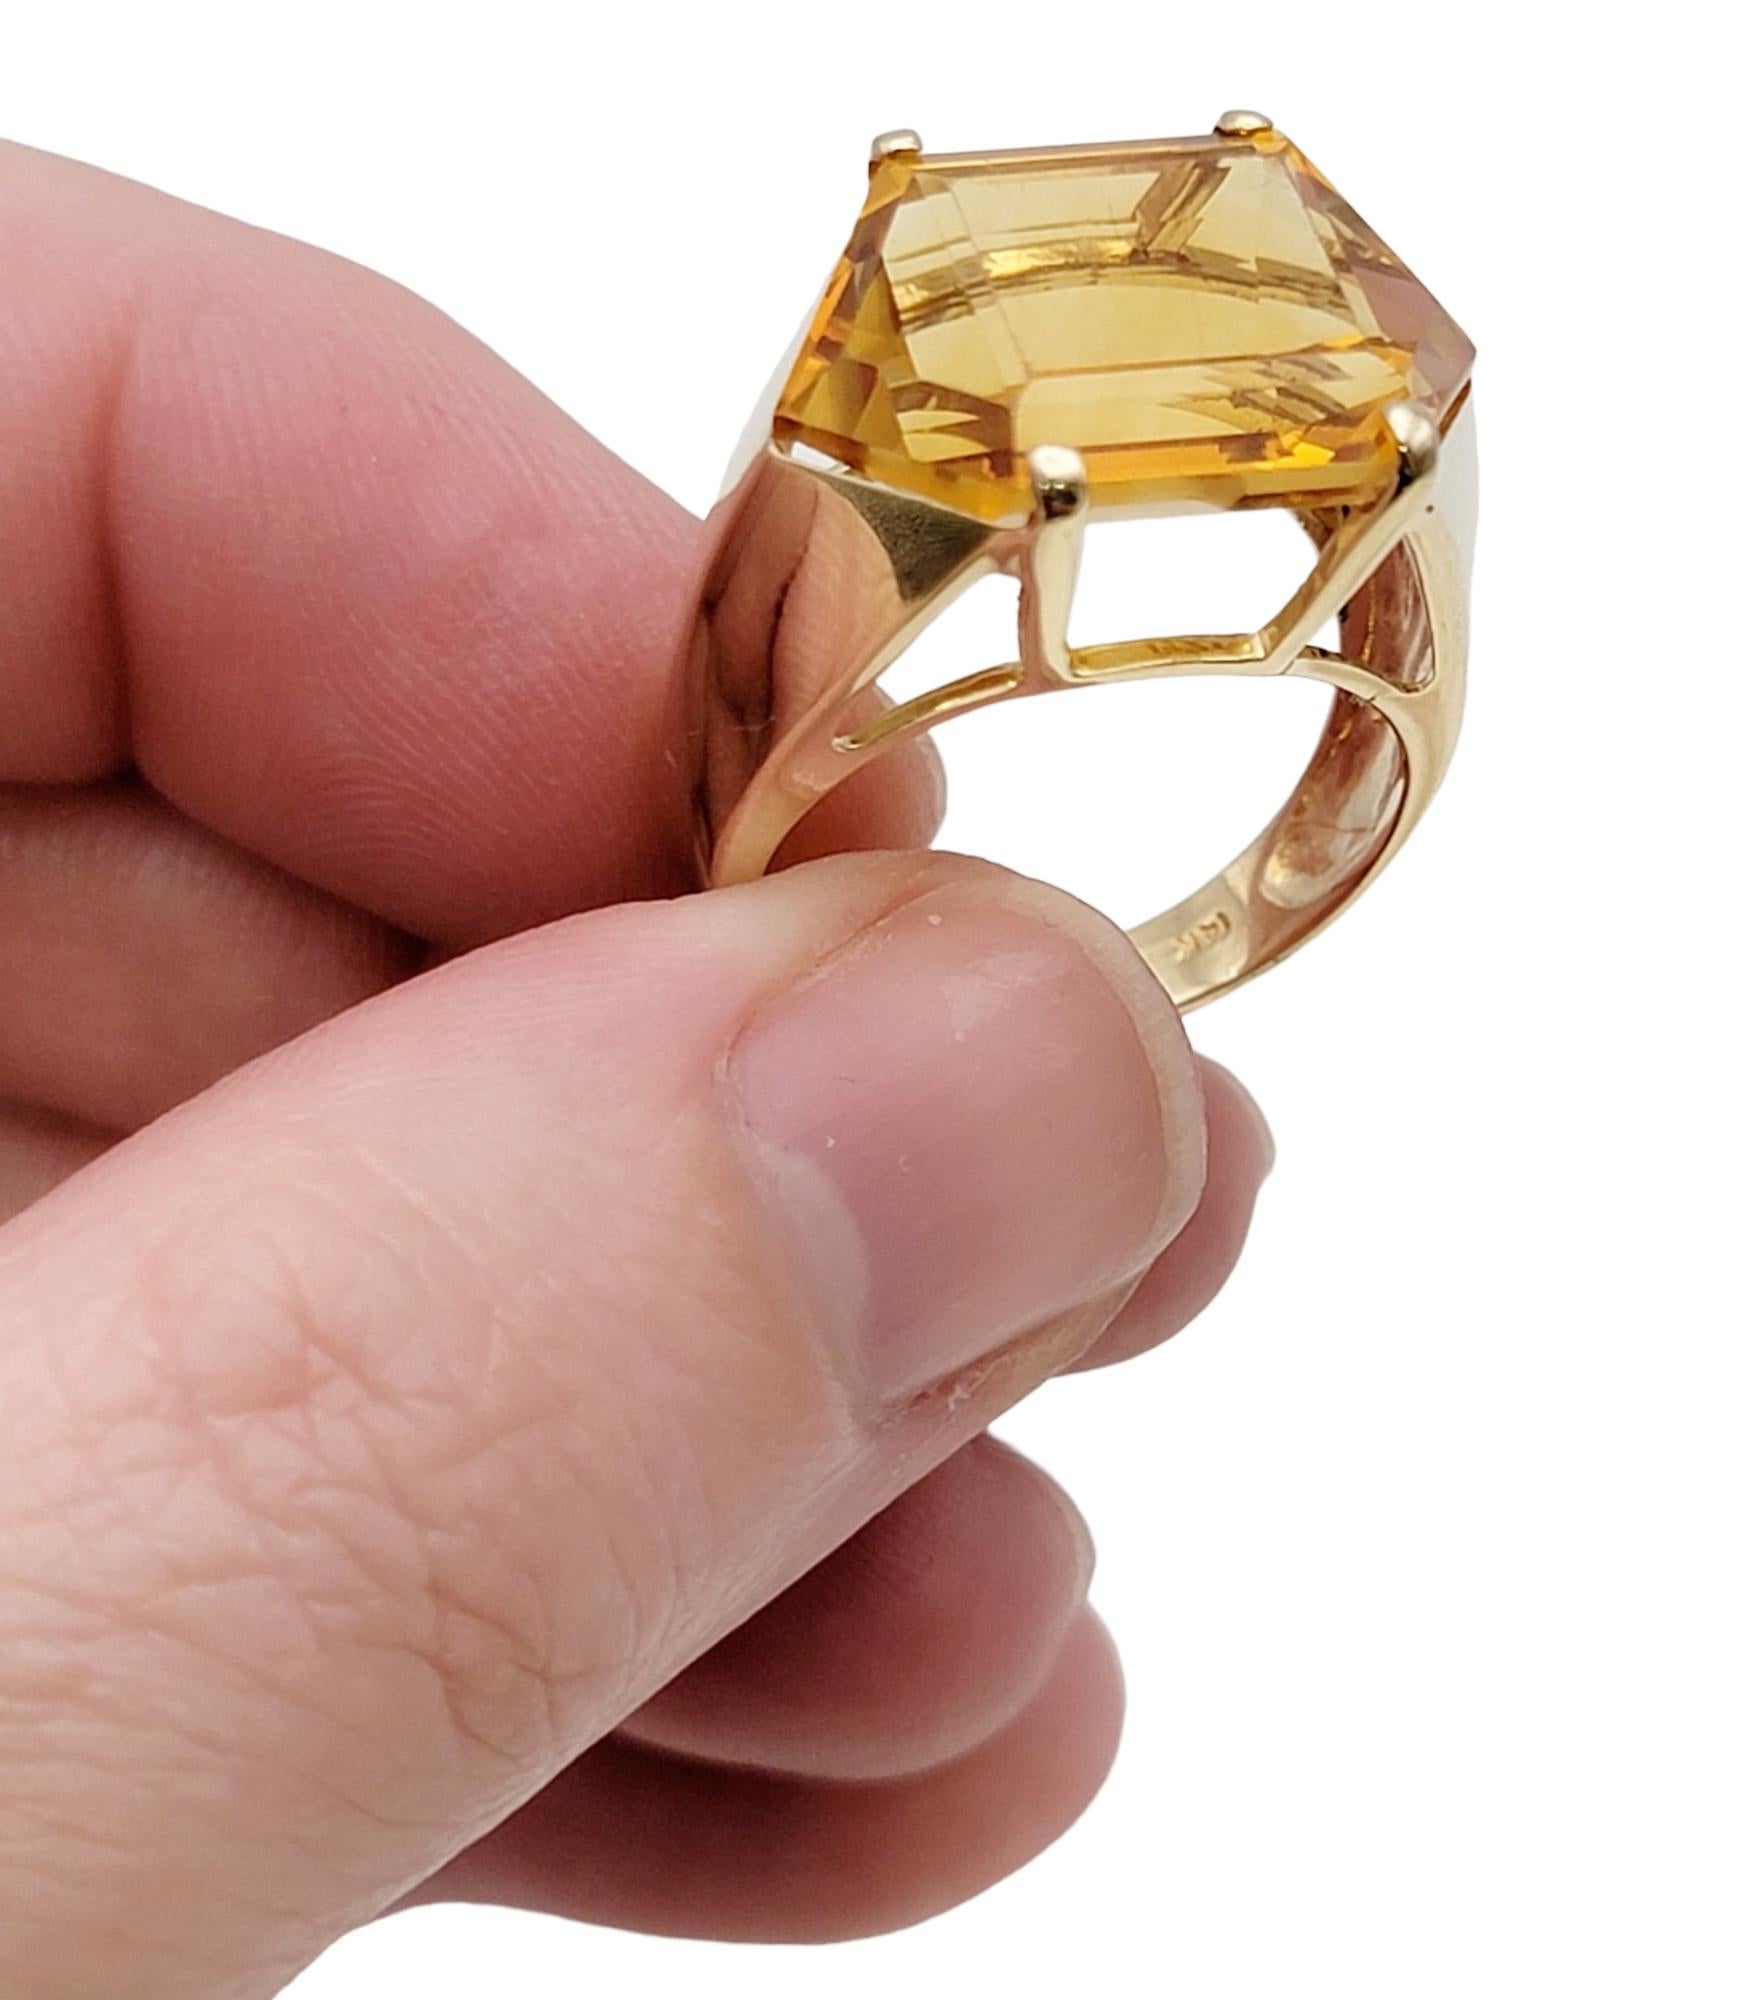 10.46 Carats Total Hexagonal Cut Citrine Cocktail Ring in 14 Karat Yellow Gold For Sale 7